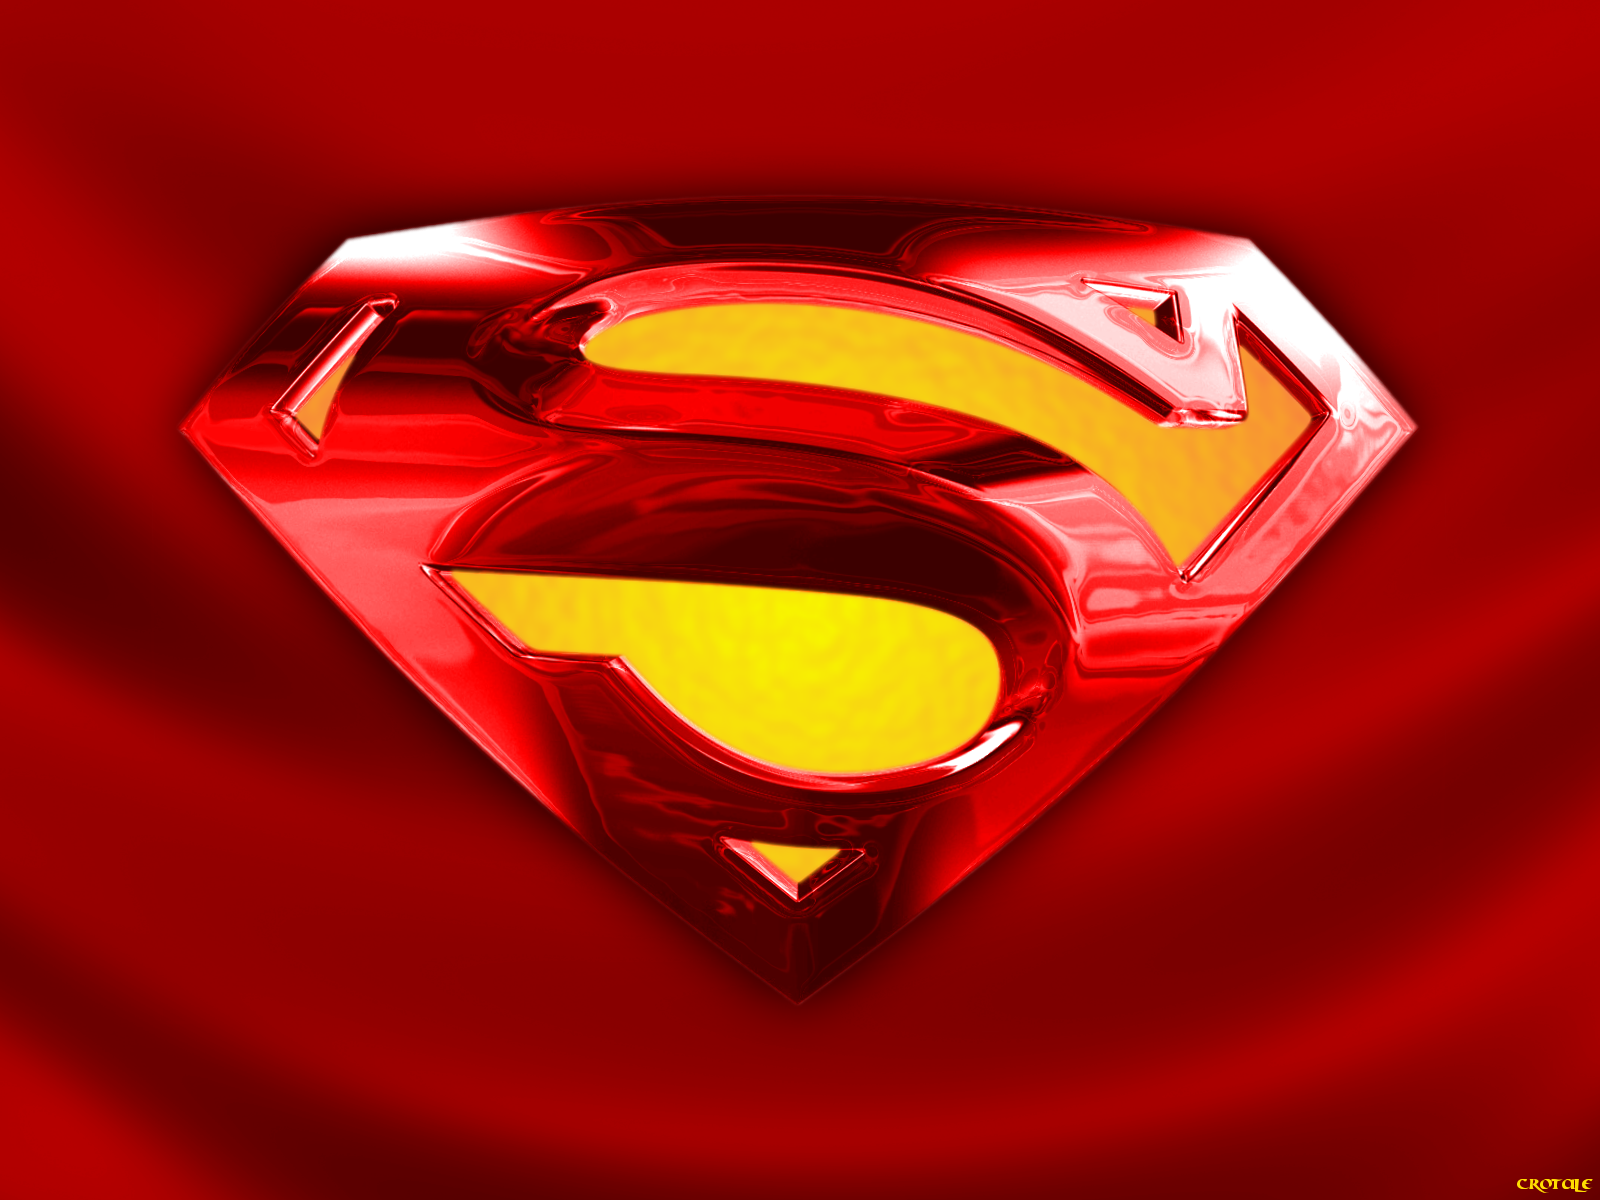 superman. Superman Shield on red cape by Crotale. Superman wallpaper logo, Superman, Superman logo